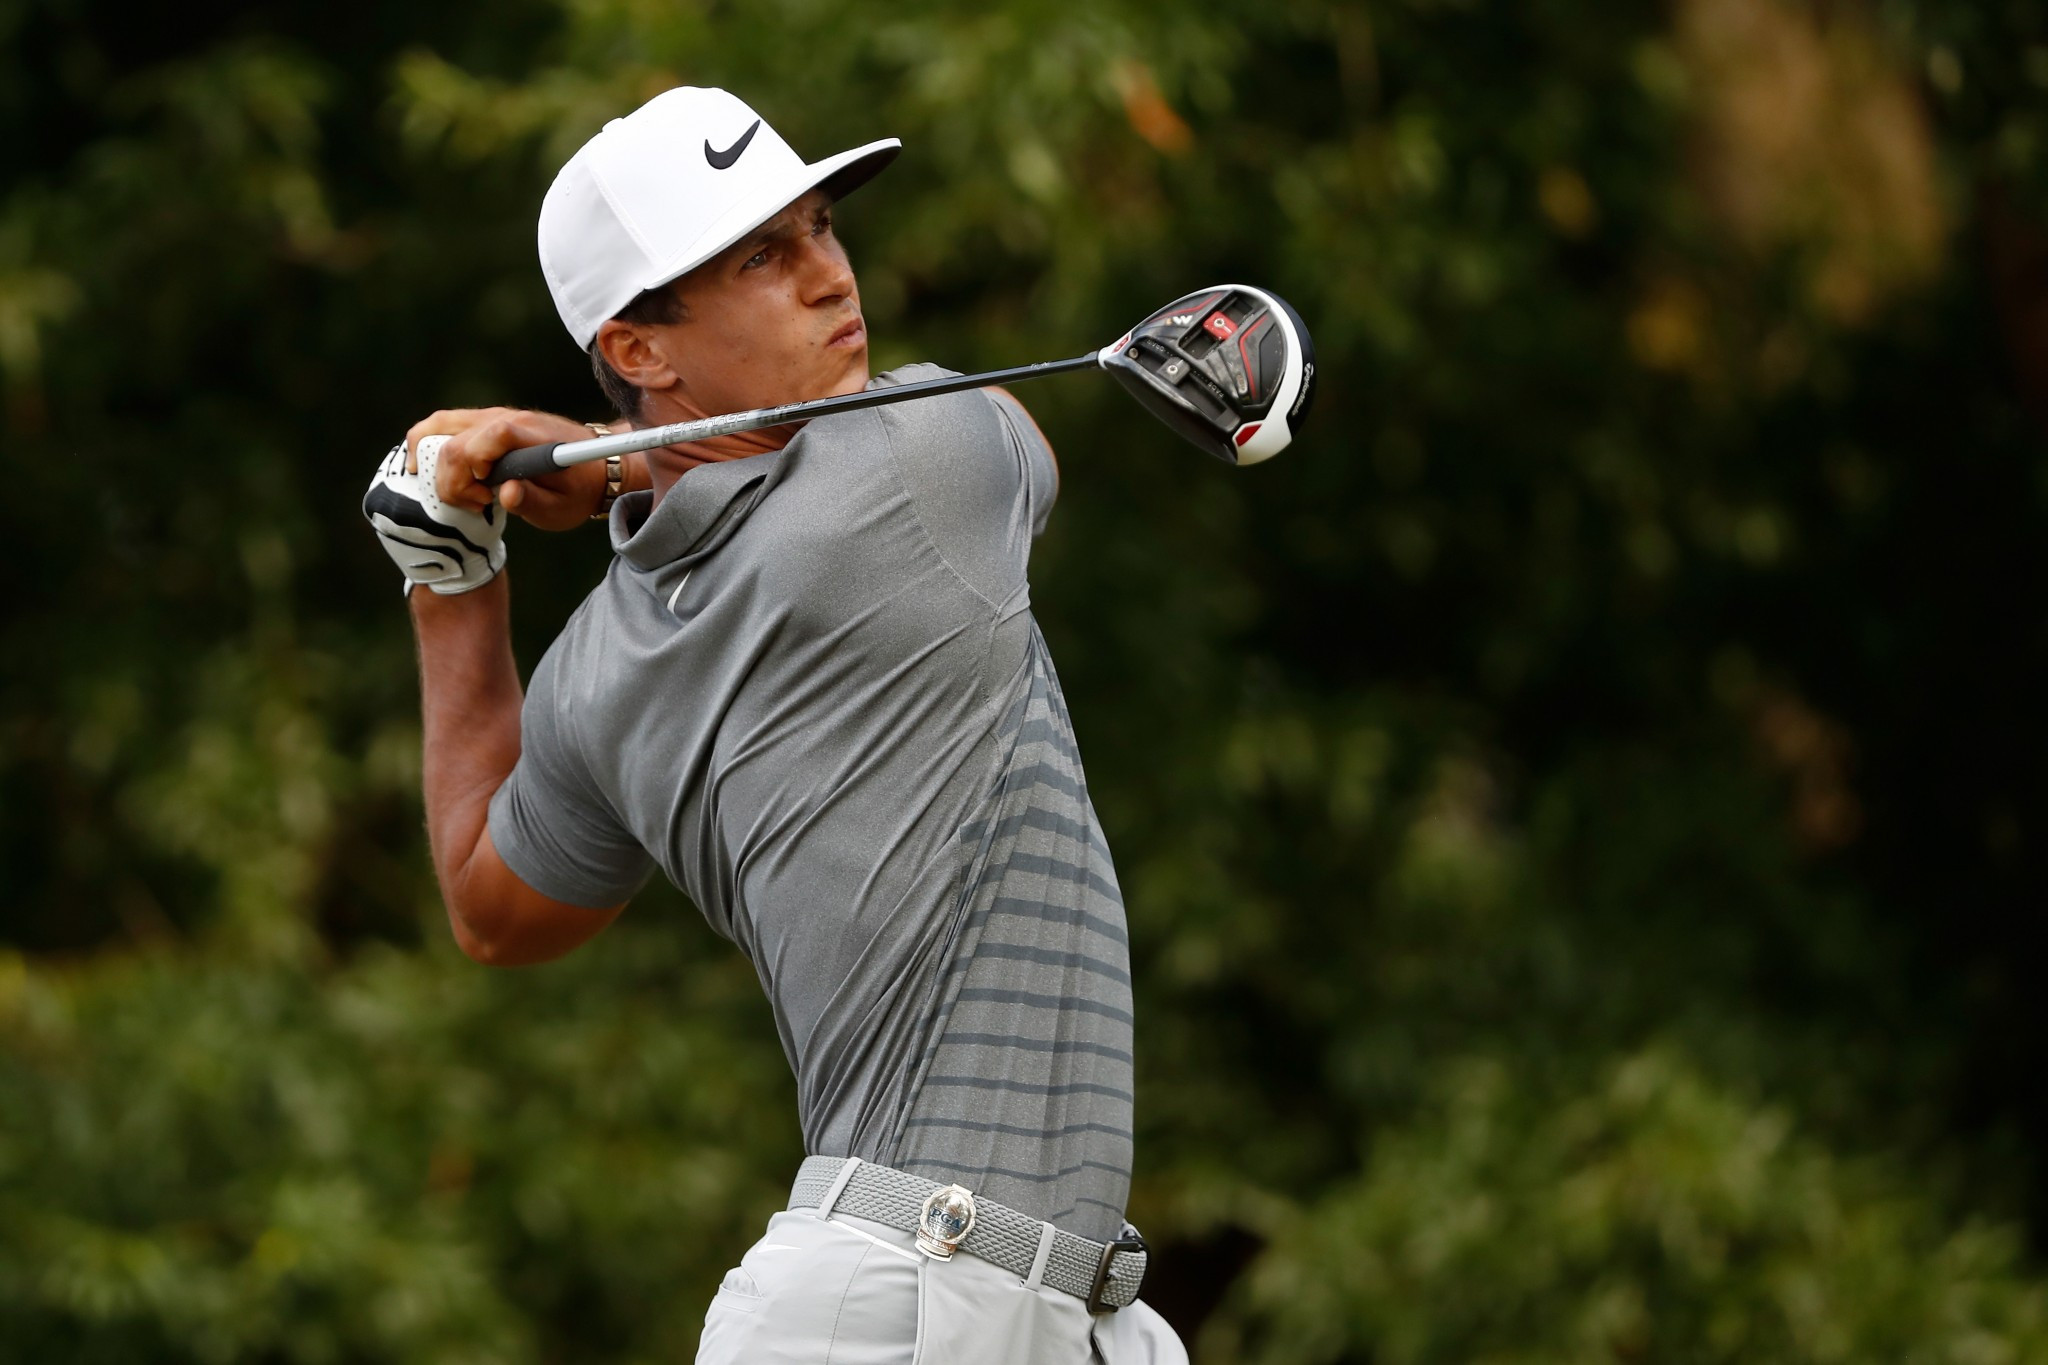 Thorbjorn Olesen is tied for the lead after the first round of the PGA Championship ©Getty Images